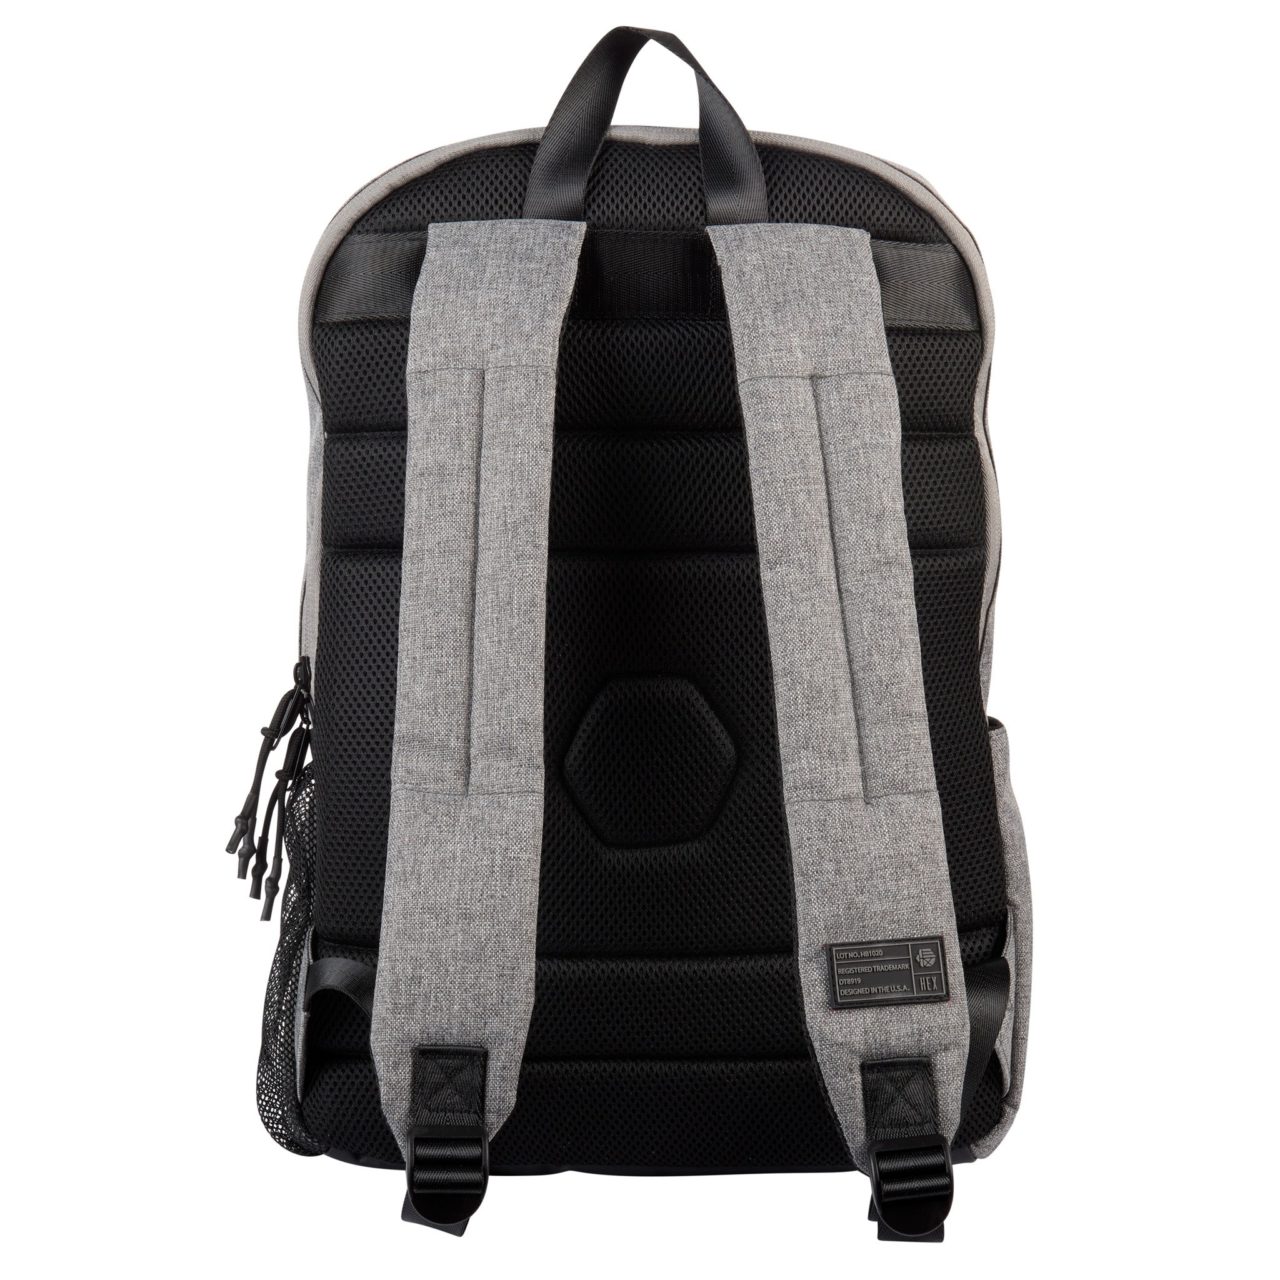 Aspect Backpack lifestyle image (HEX)